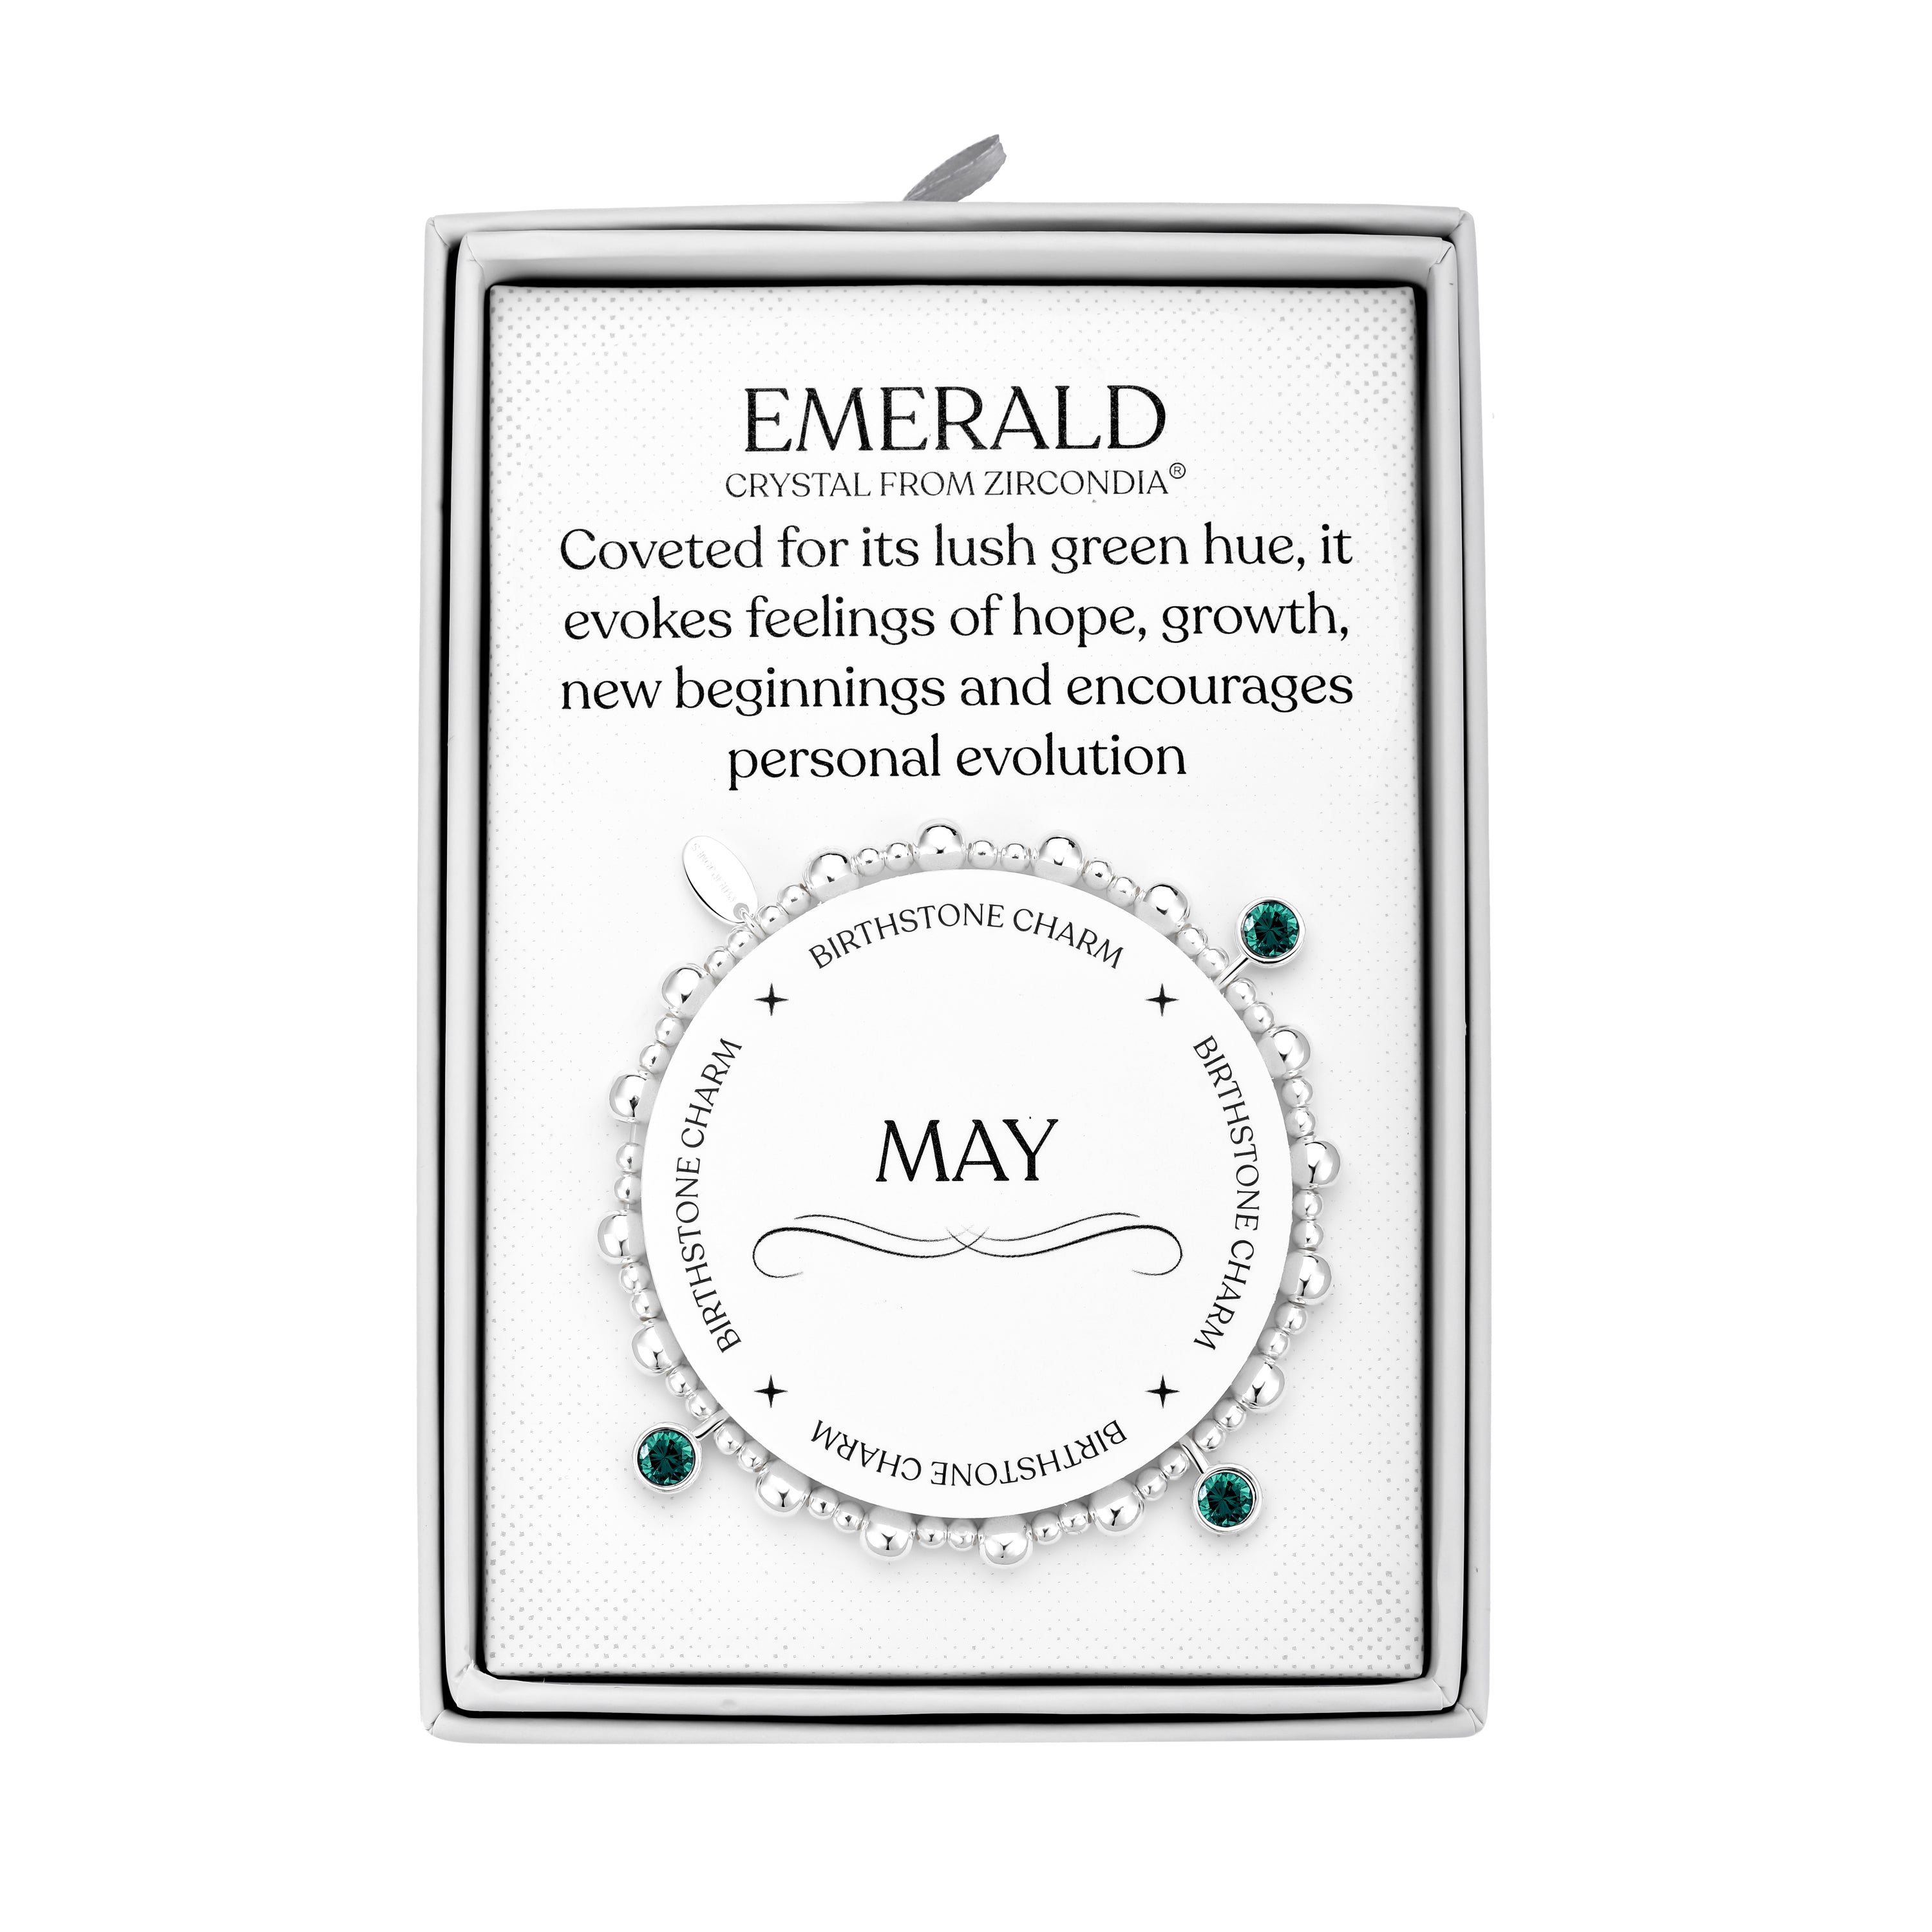 May (Emerald) Birthstone Stretch Charm Bracelet with Quote Gift Box by Philip Jones Jewellery